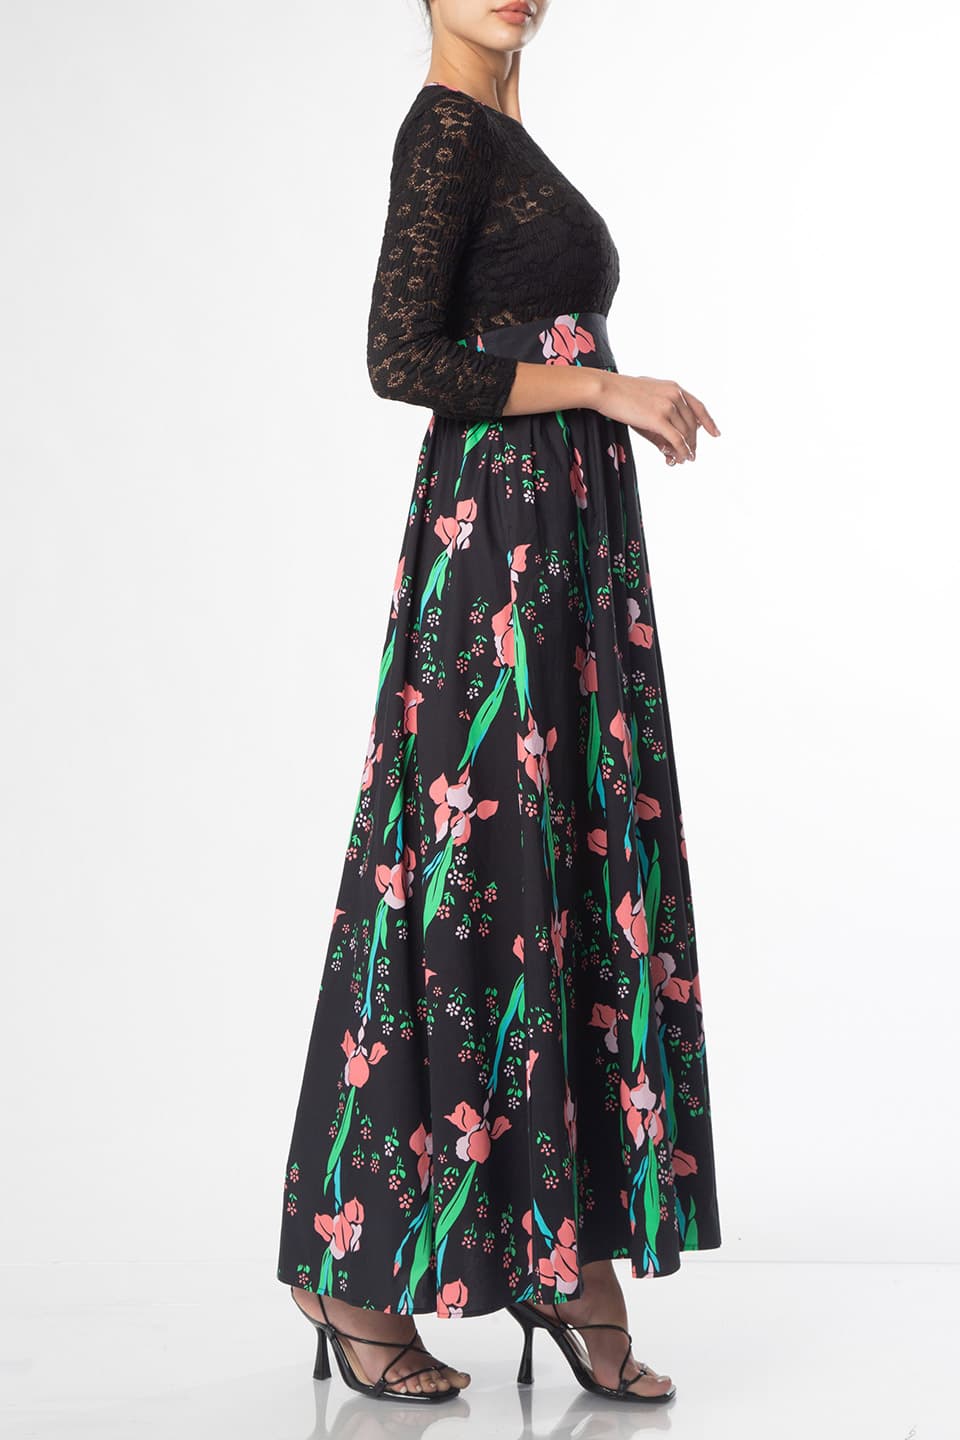 Designer Black Maxi dresses, shop online with free delivery in UAE. Product gallery 6